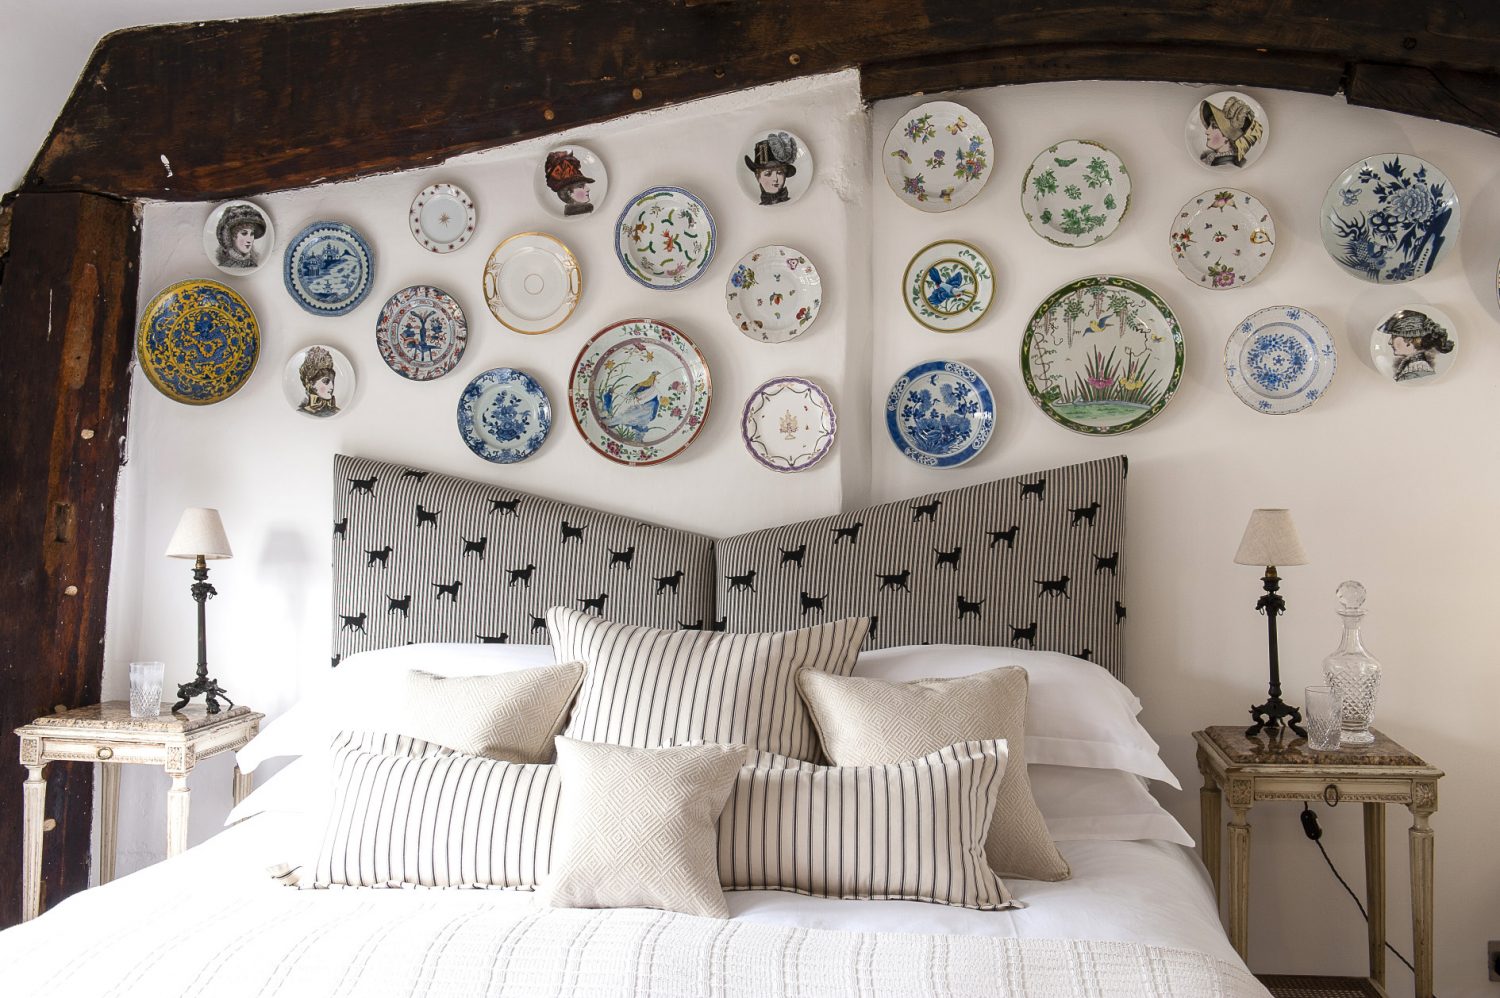 Using his grandmother’s Herend pieces as a start, Matthew has gathered a superb collection of porcelain plates which now hang above the upholstered bedhead in Labrador